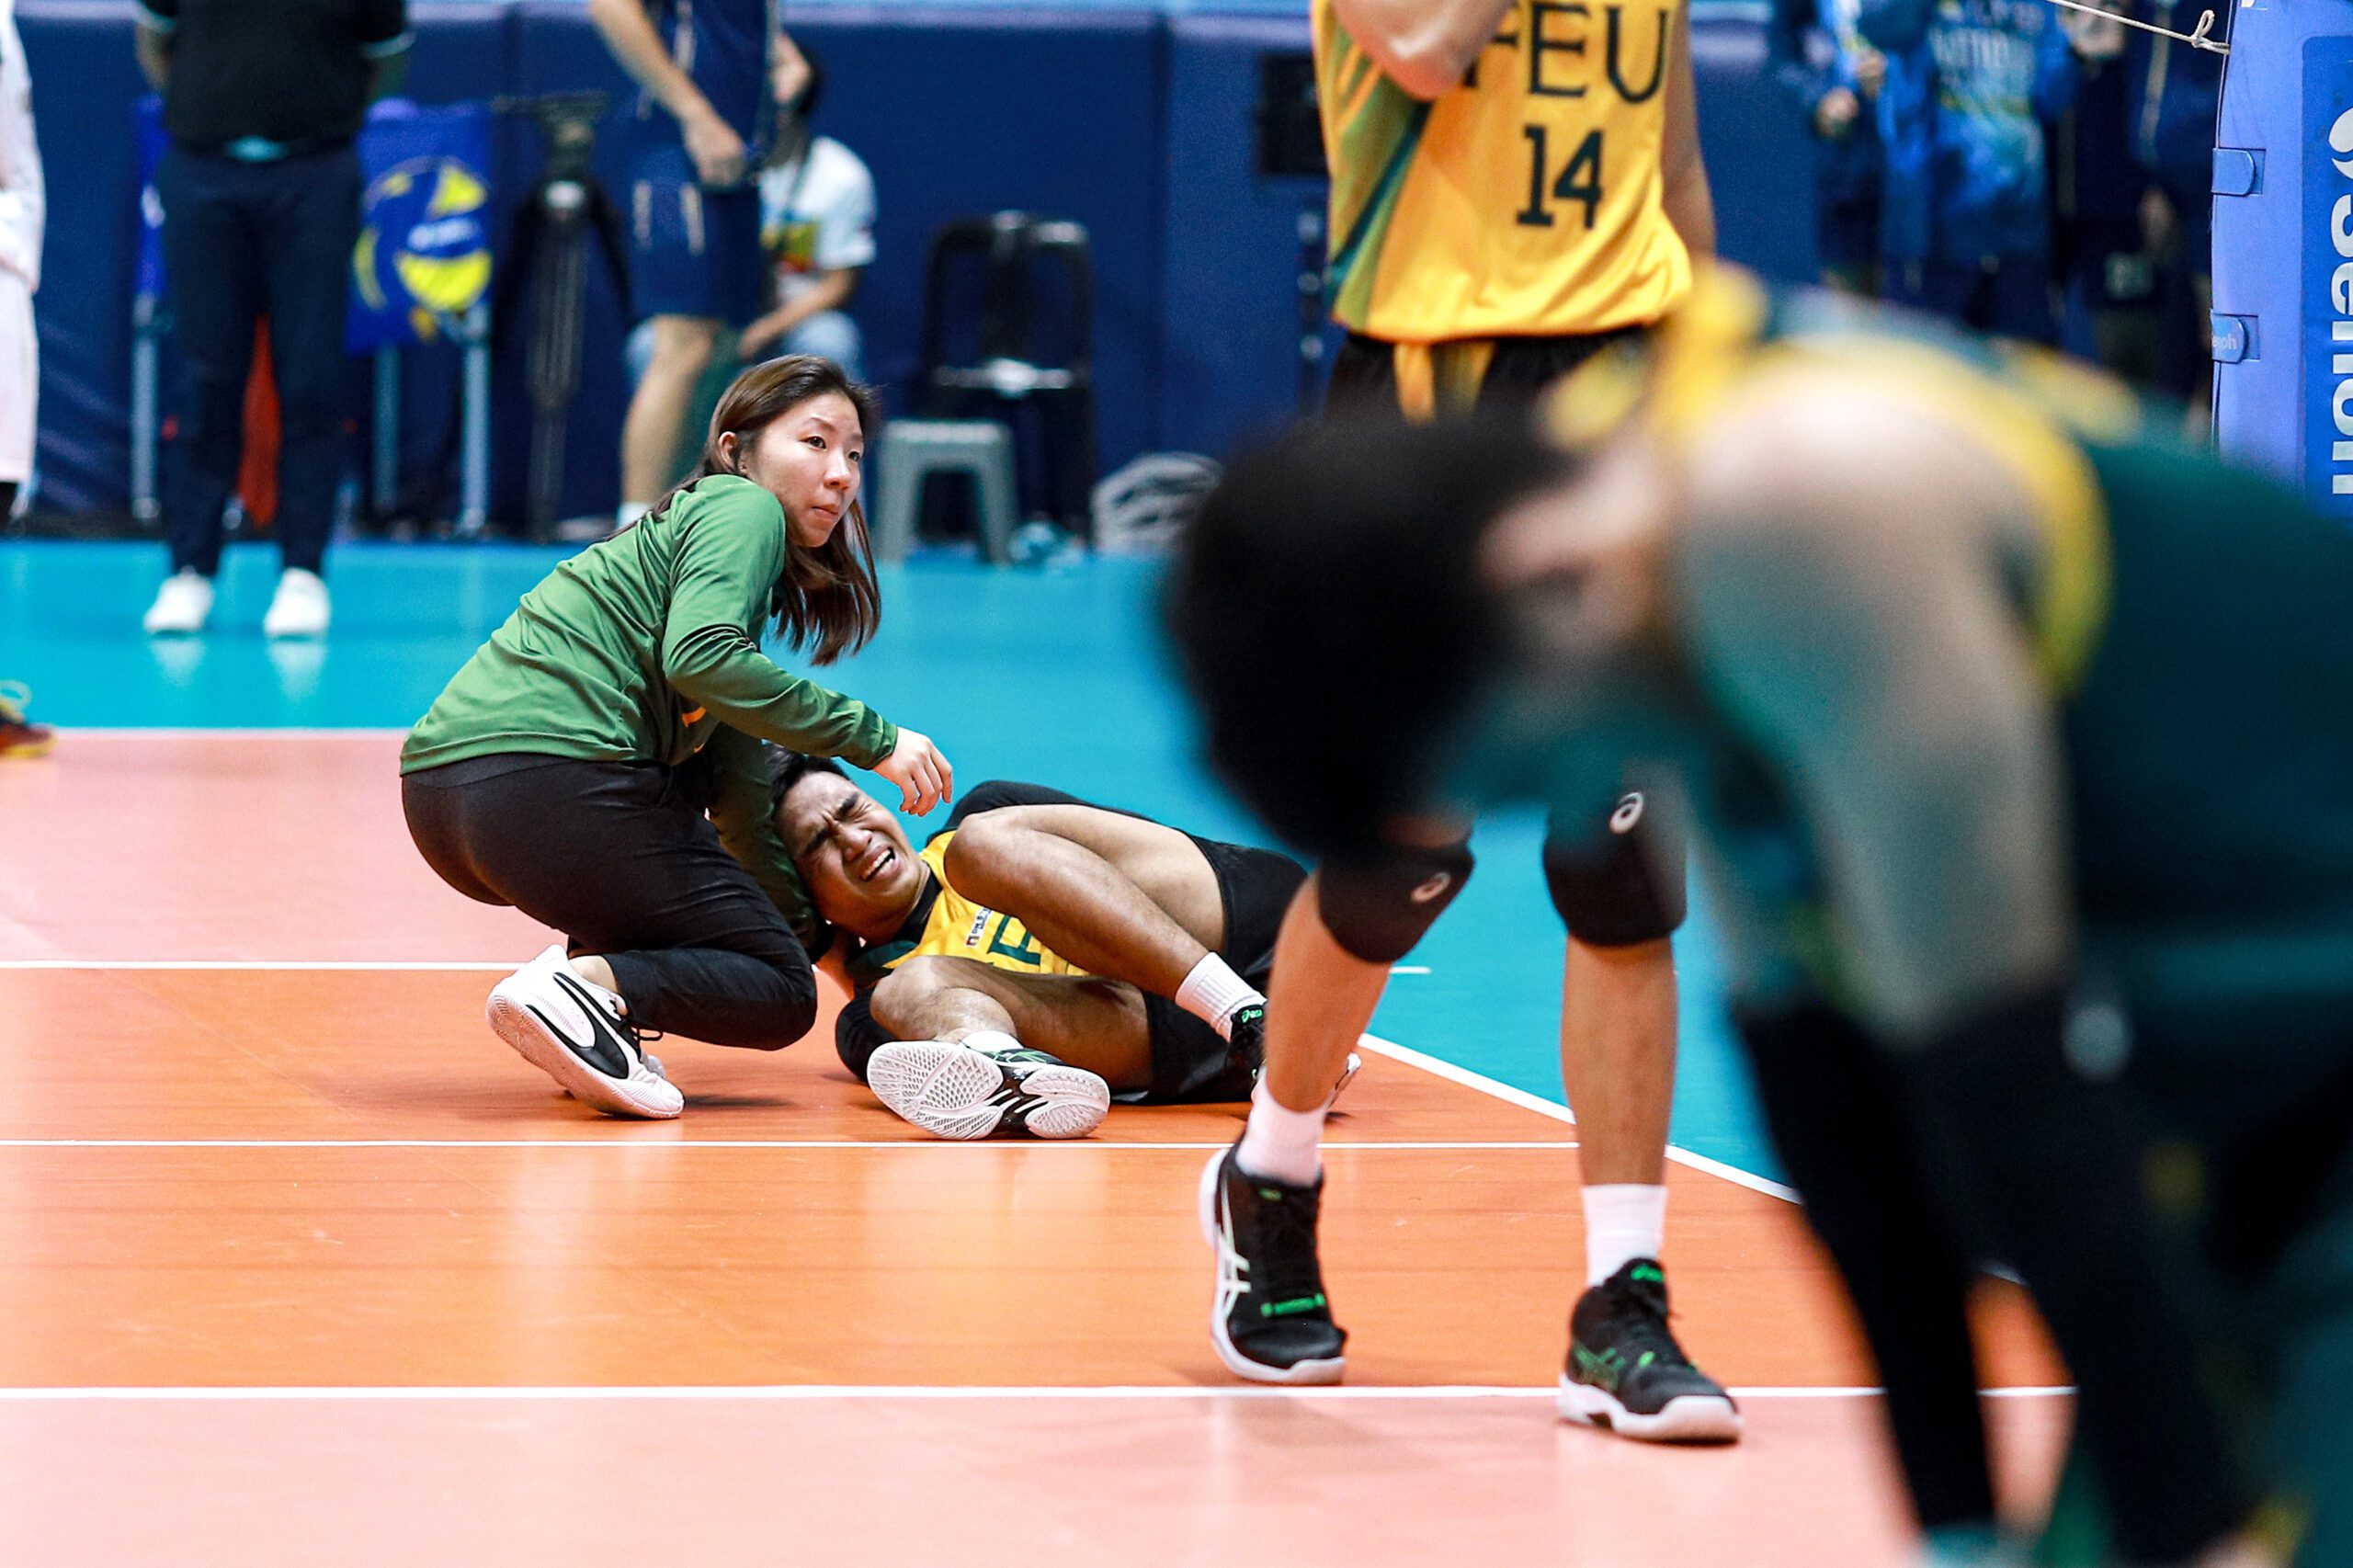 FEU's CJ Cabatac in pain after suffering a leg injury. –UAAP PHOTO